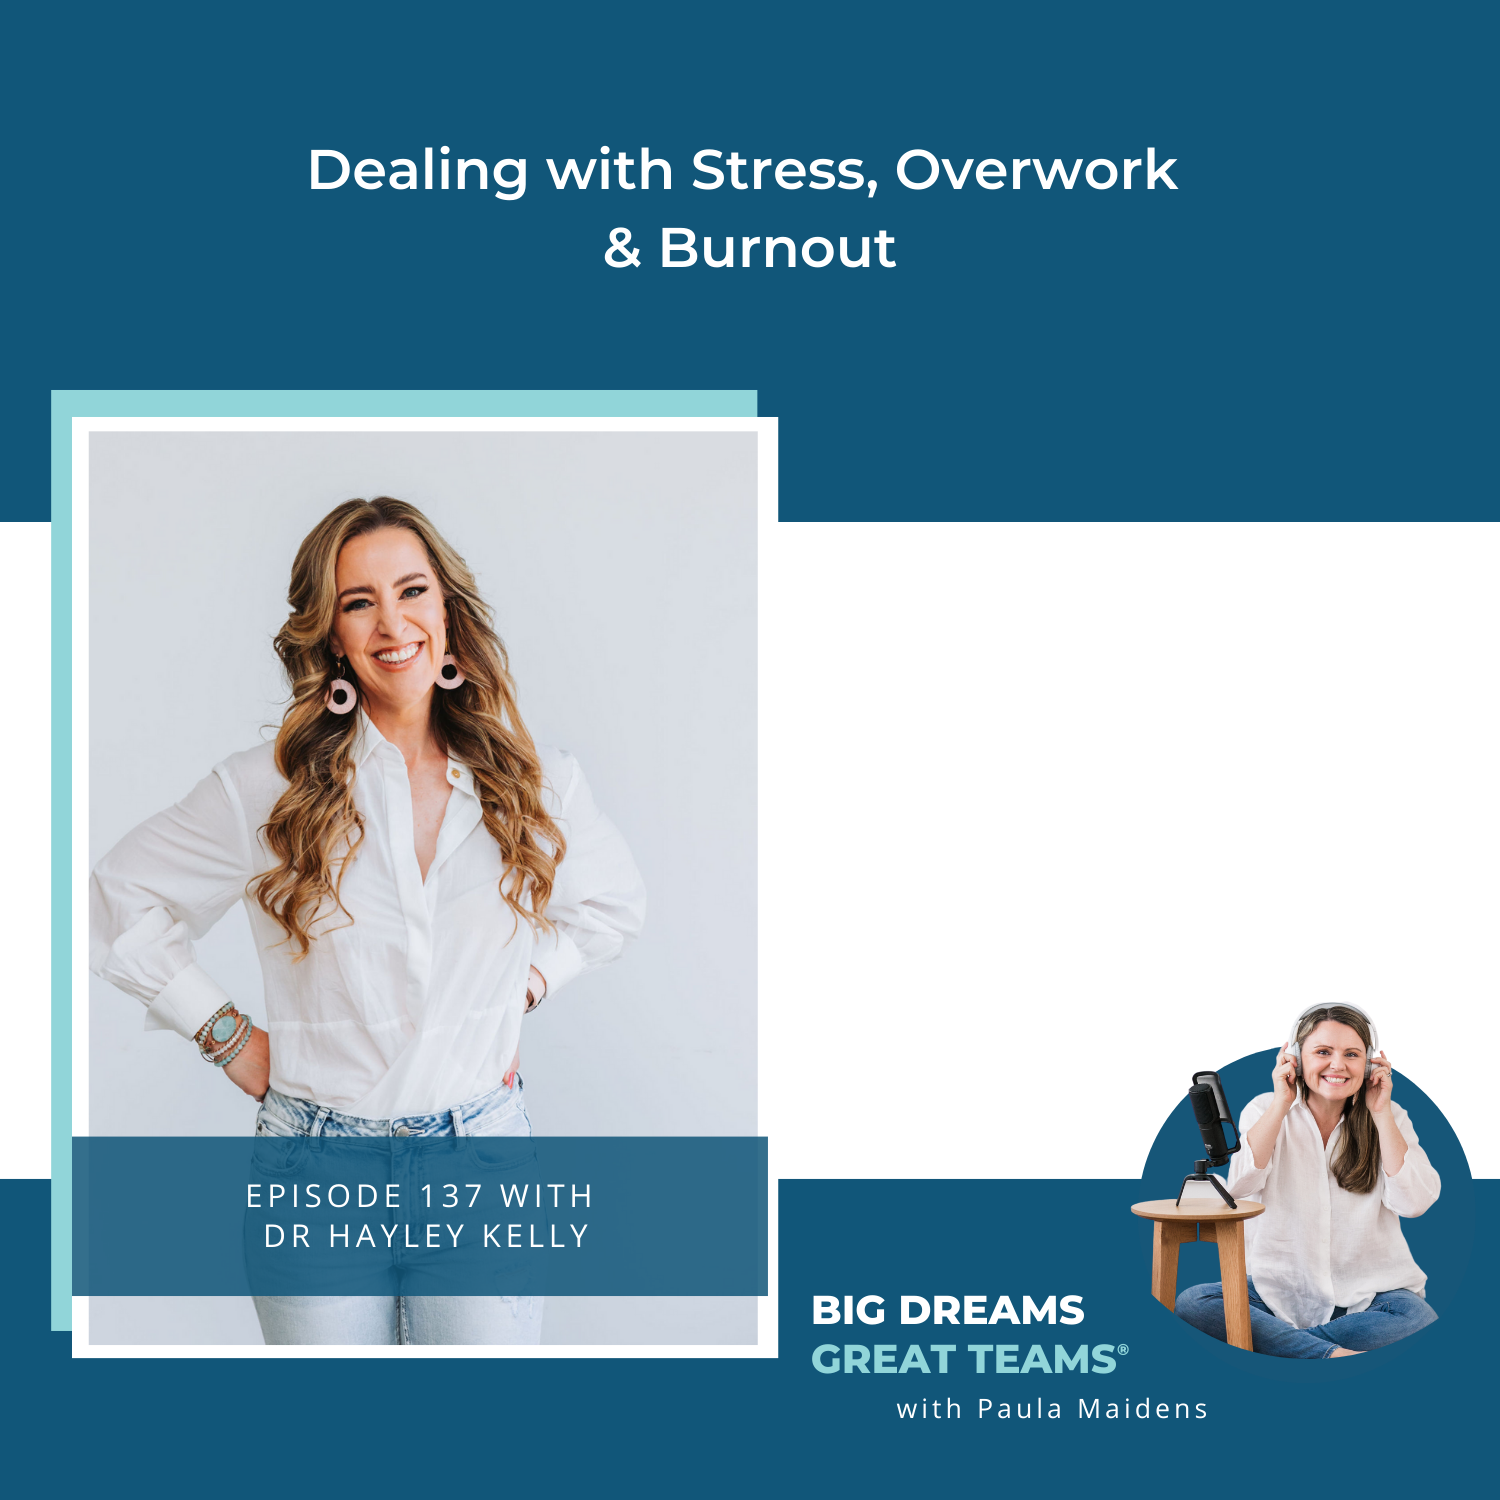 Episode #137 - Dealing with Stress, Overwork & Burnout with Dr Hayley Kelly